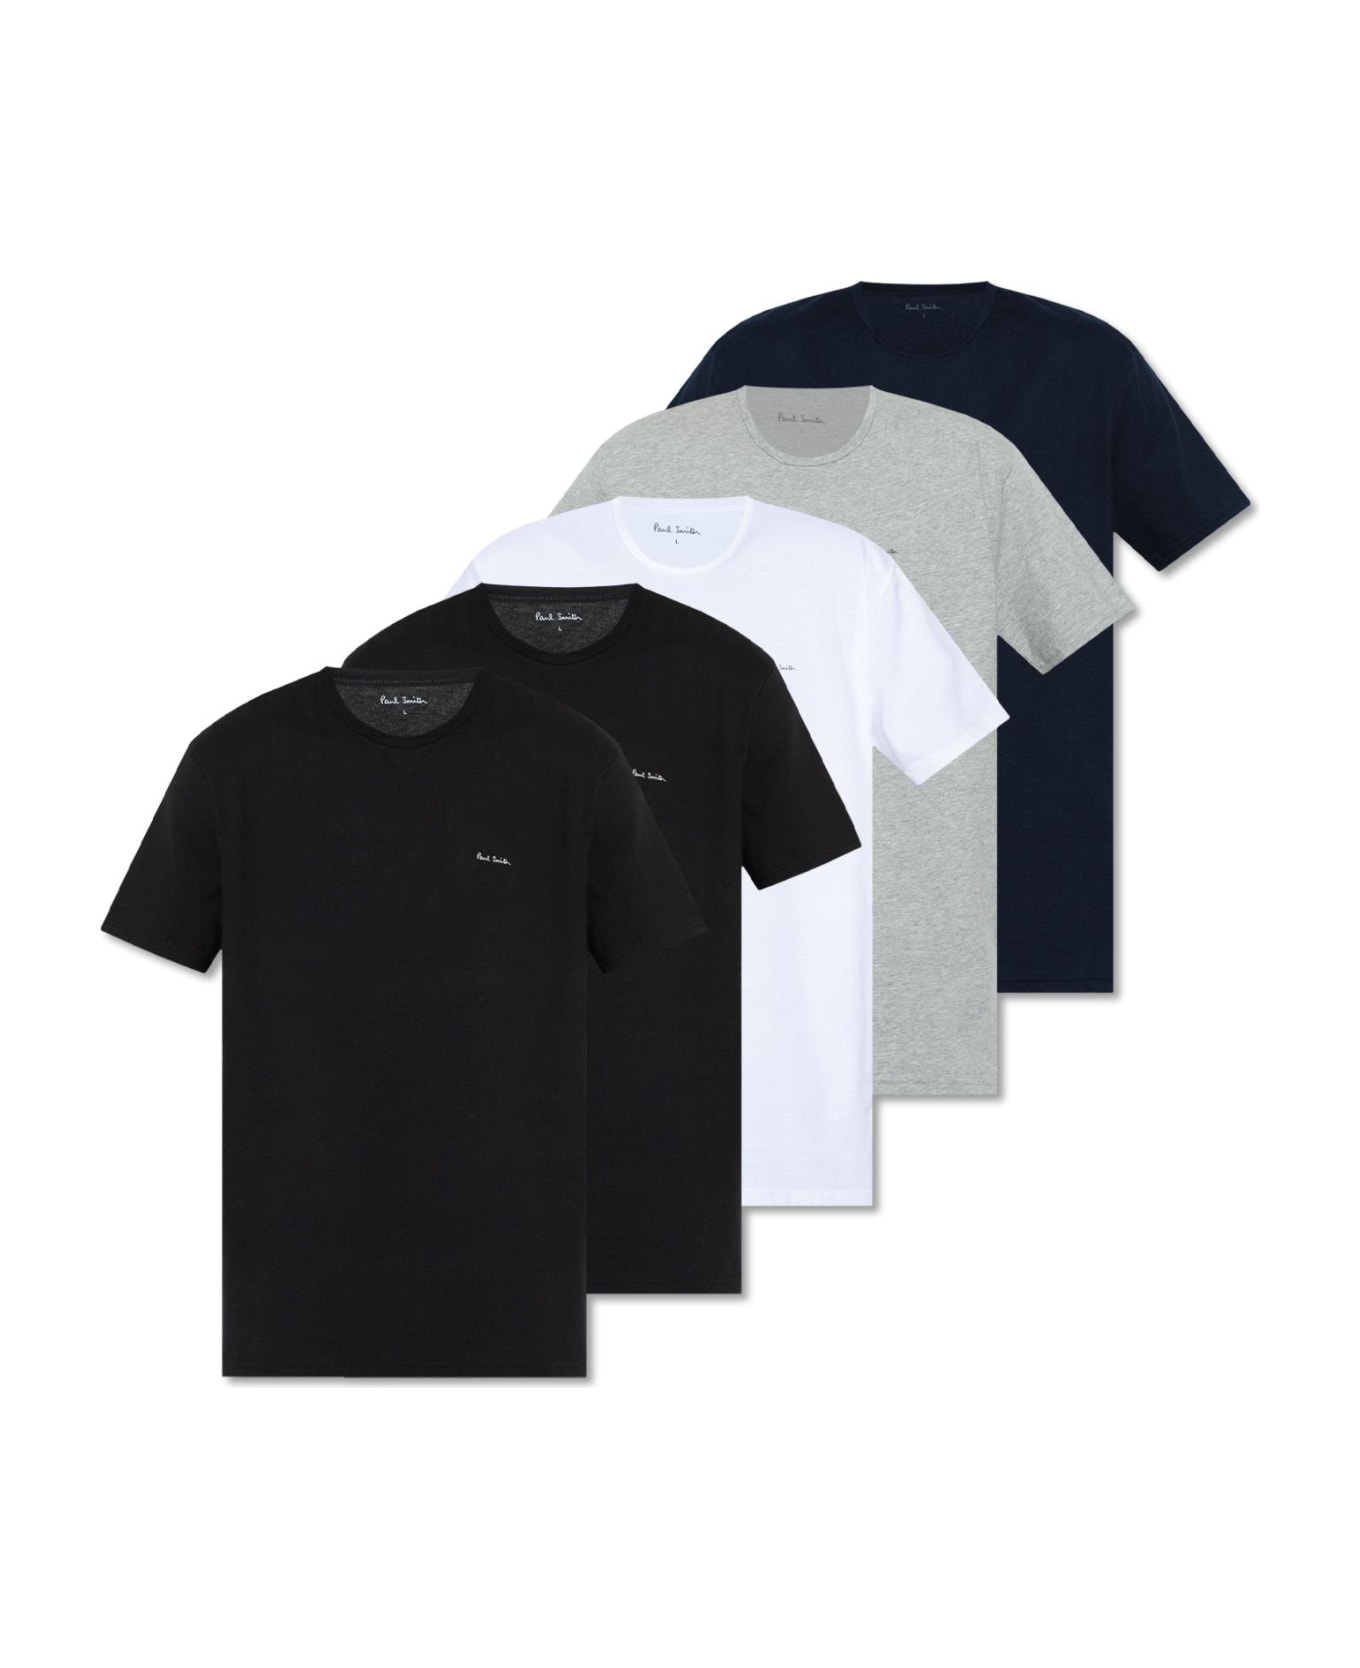 Paul Smith Branded T-shirt Five-pack - MIXED PLATE 1 シャツ